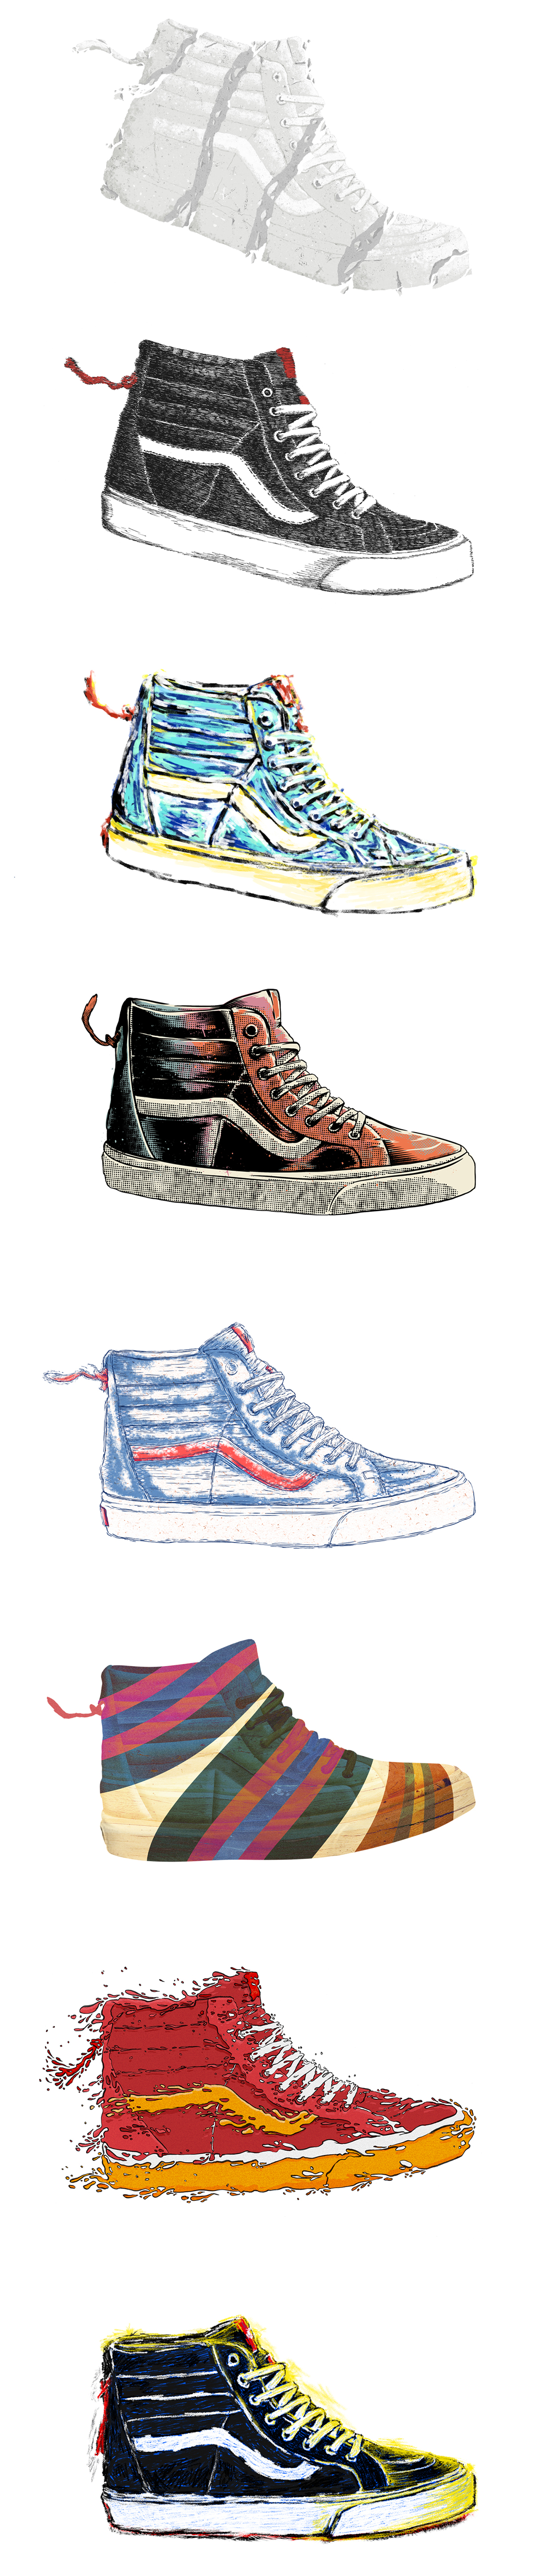 Vans Classic the hives skateboarding skate ilustracion gif animated Rock And Roll shoes handmade walk brand Behance Style